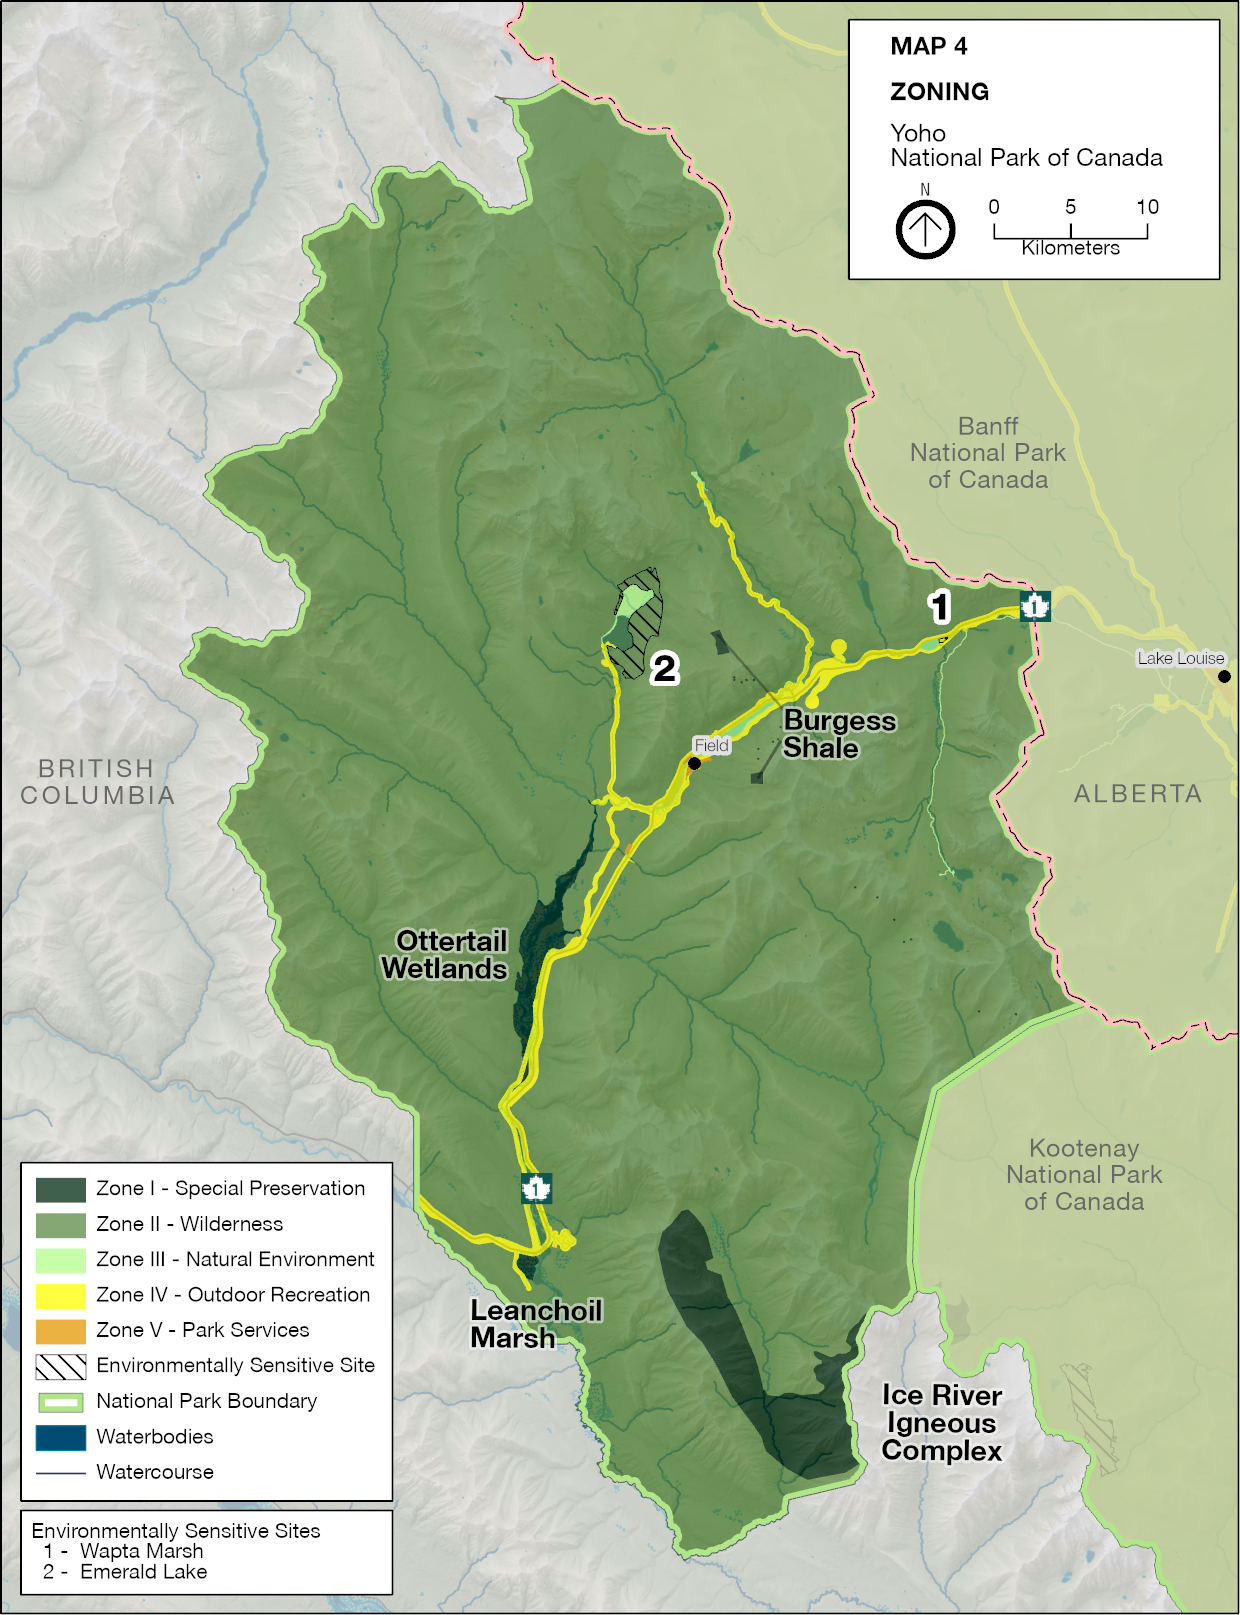 A colour coded map of the park showing the application of five zones ranging from Special Preservation to Park Services. — Text description follows